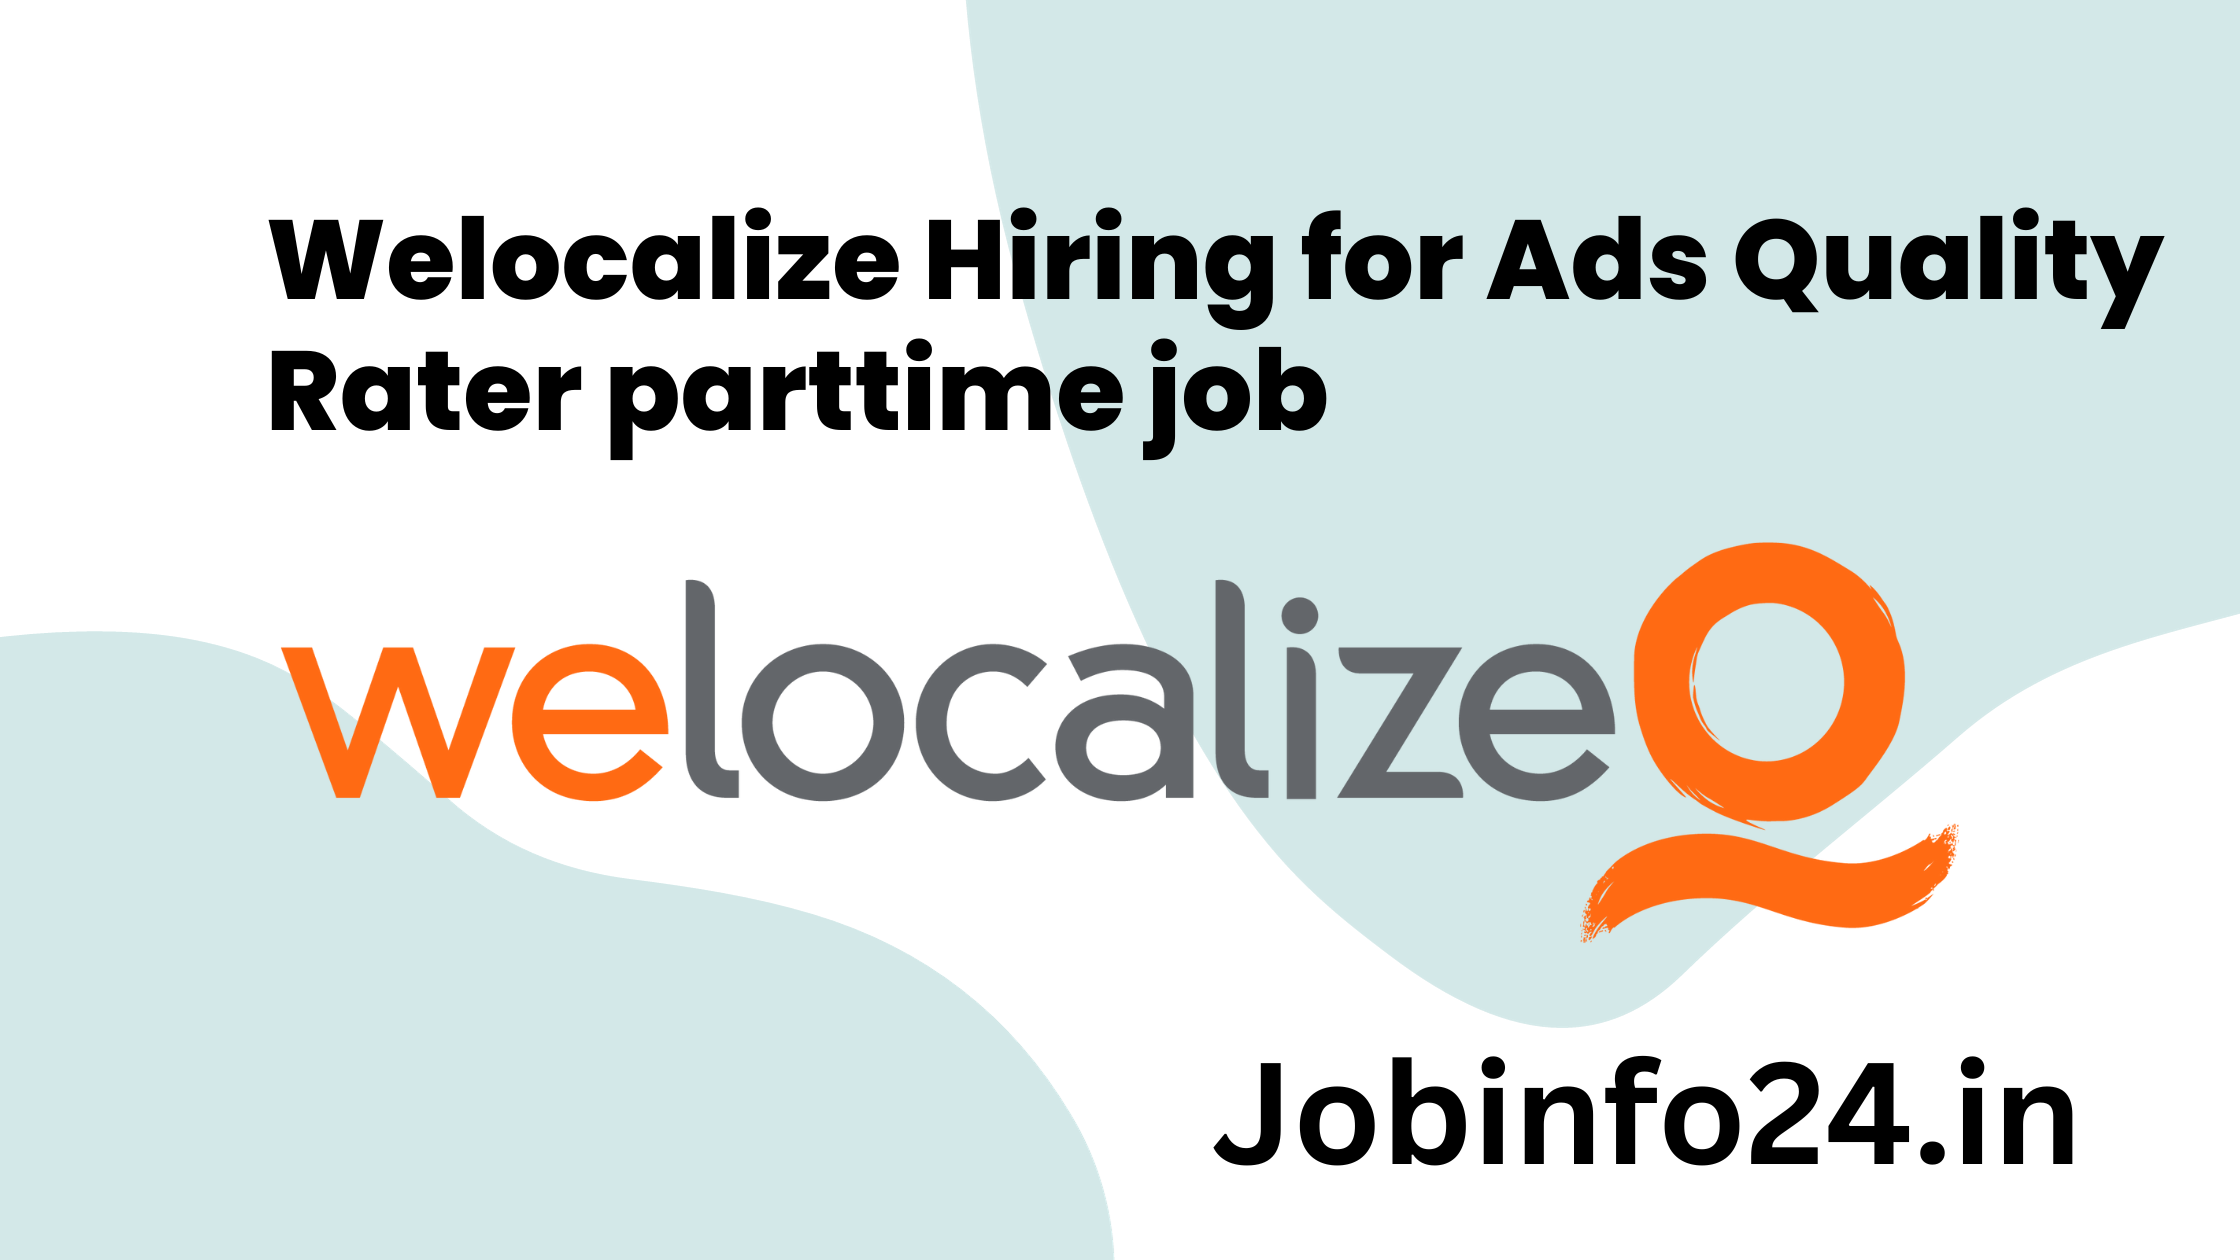 Welocalize Hiring for Ads Quality Rater parttime job